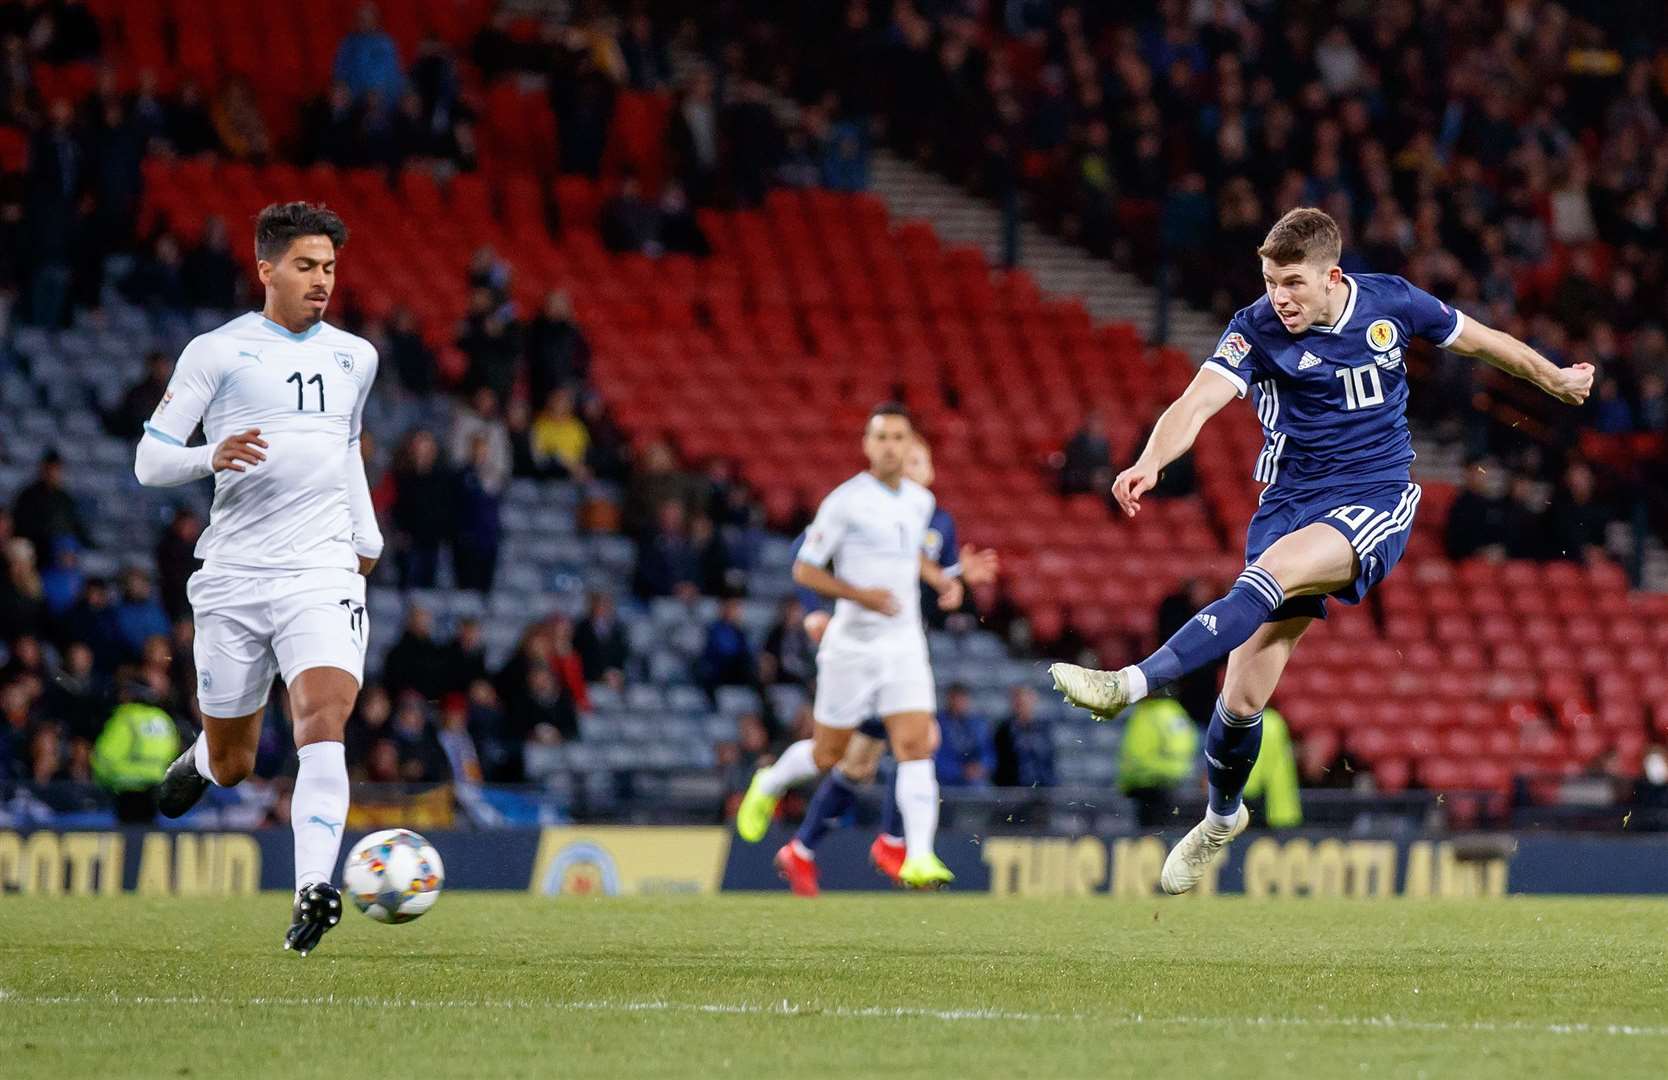 Ryan Christie scored his first goal for Scotland against Cyprus.